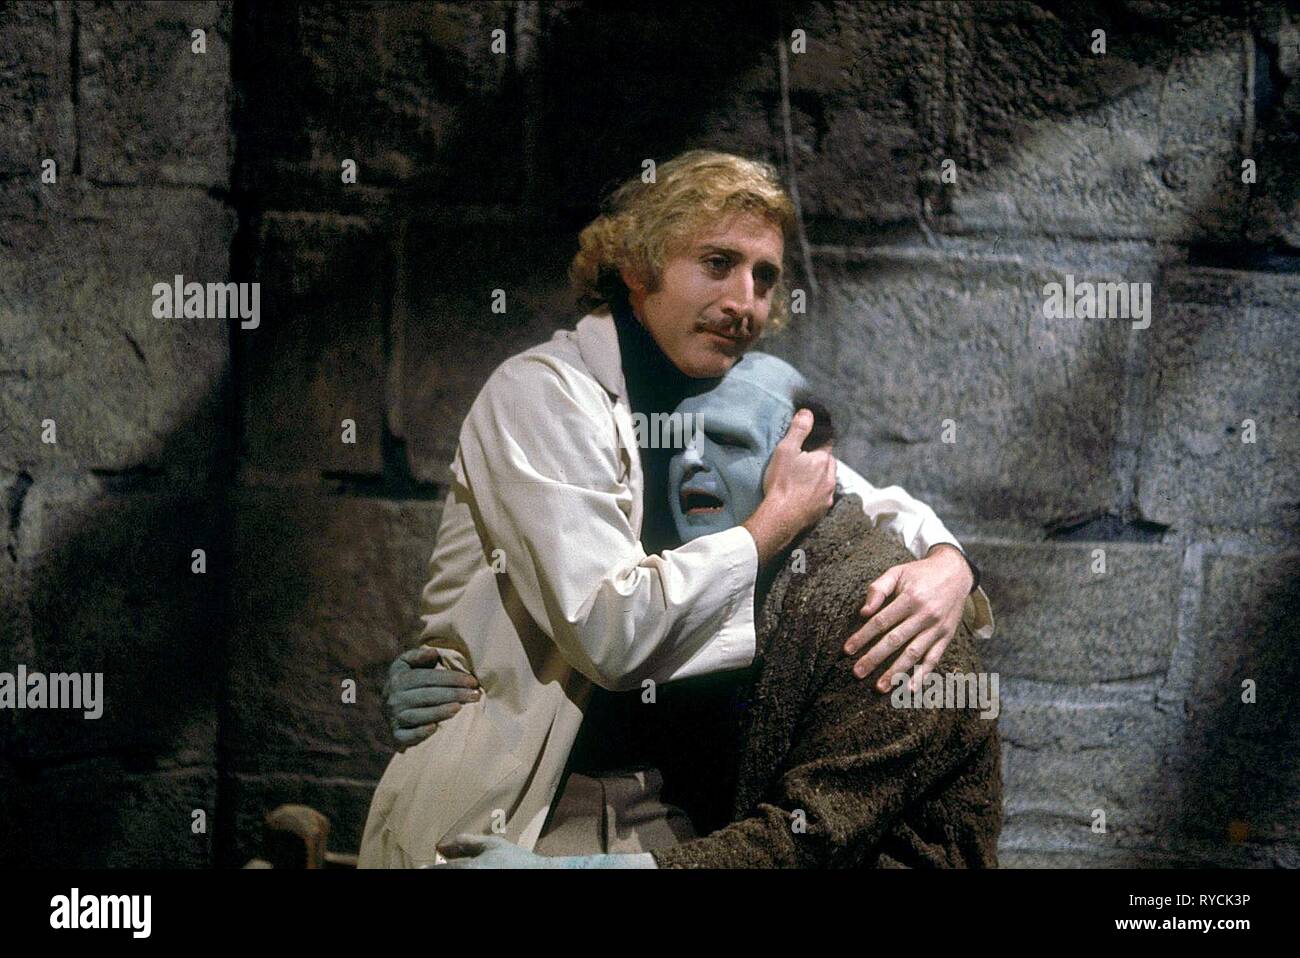 Movie young frankenstein usa 1974 hi-res stock photography and images -  Alamy